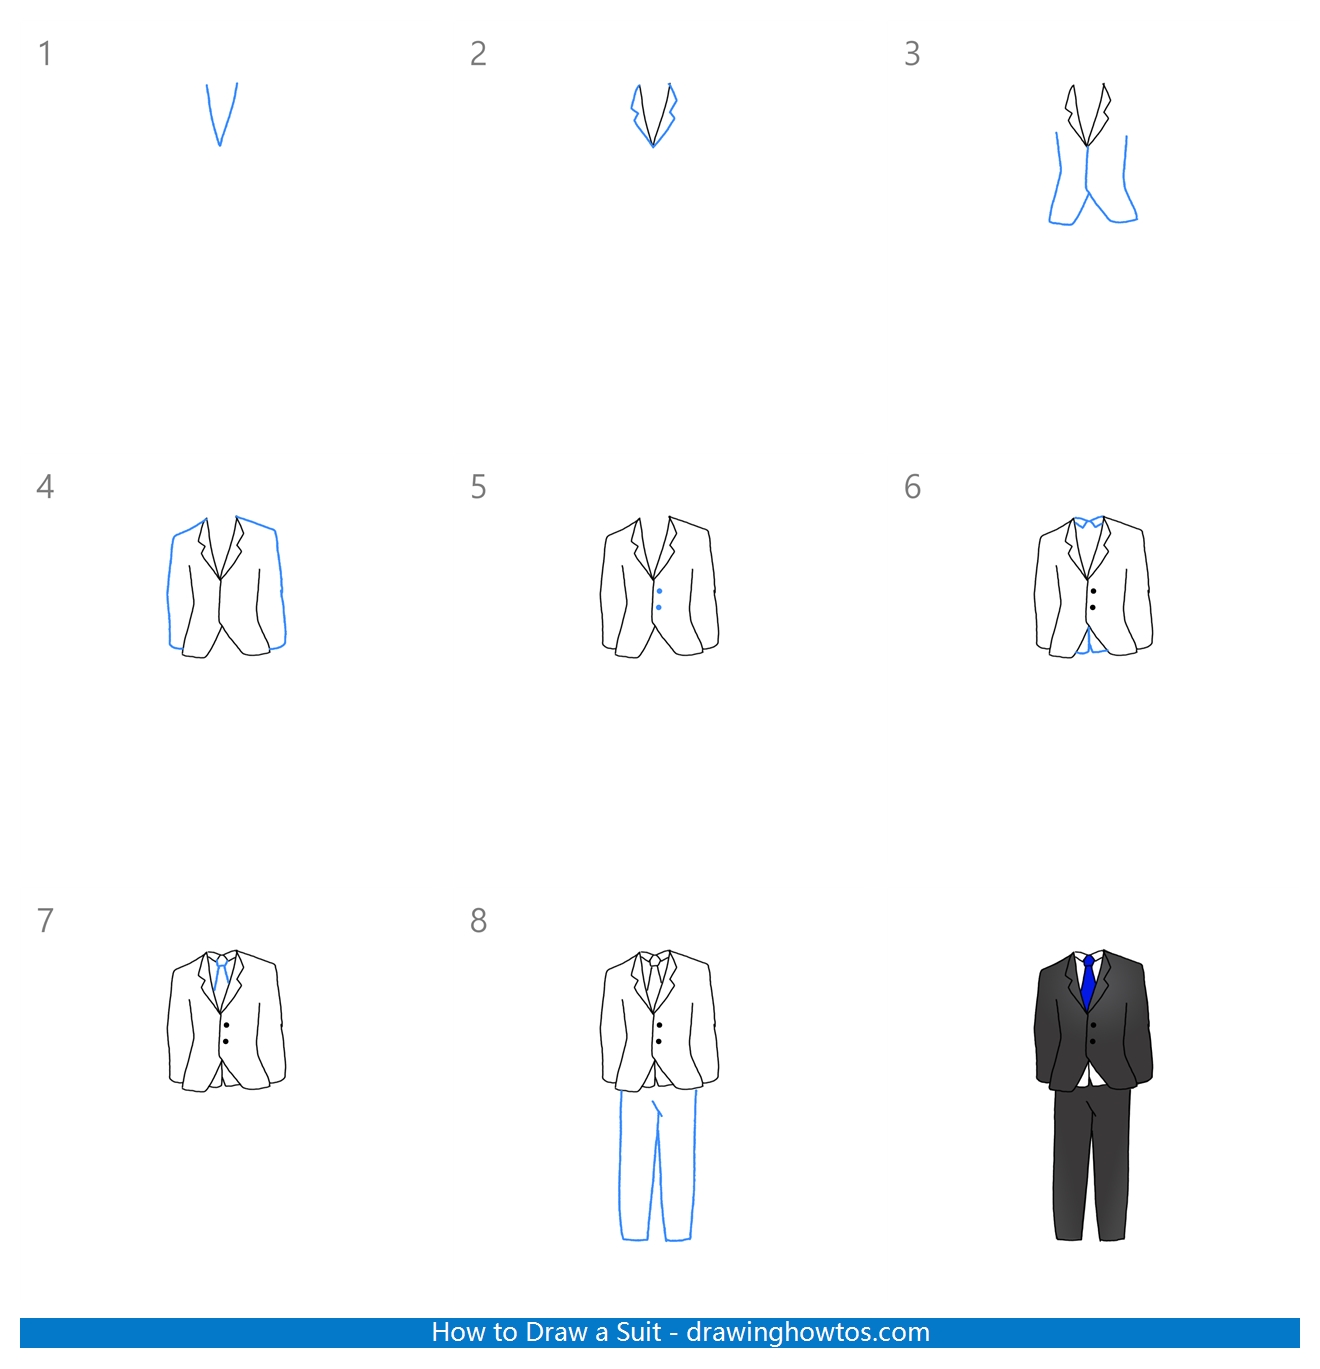 How to Draw a Suit Step by Step